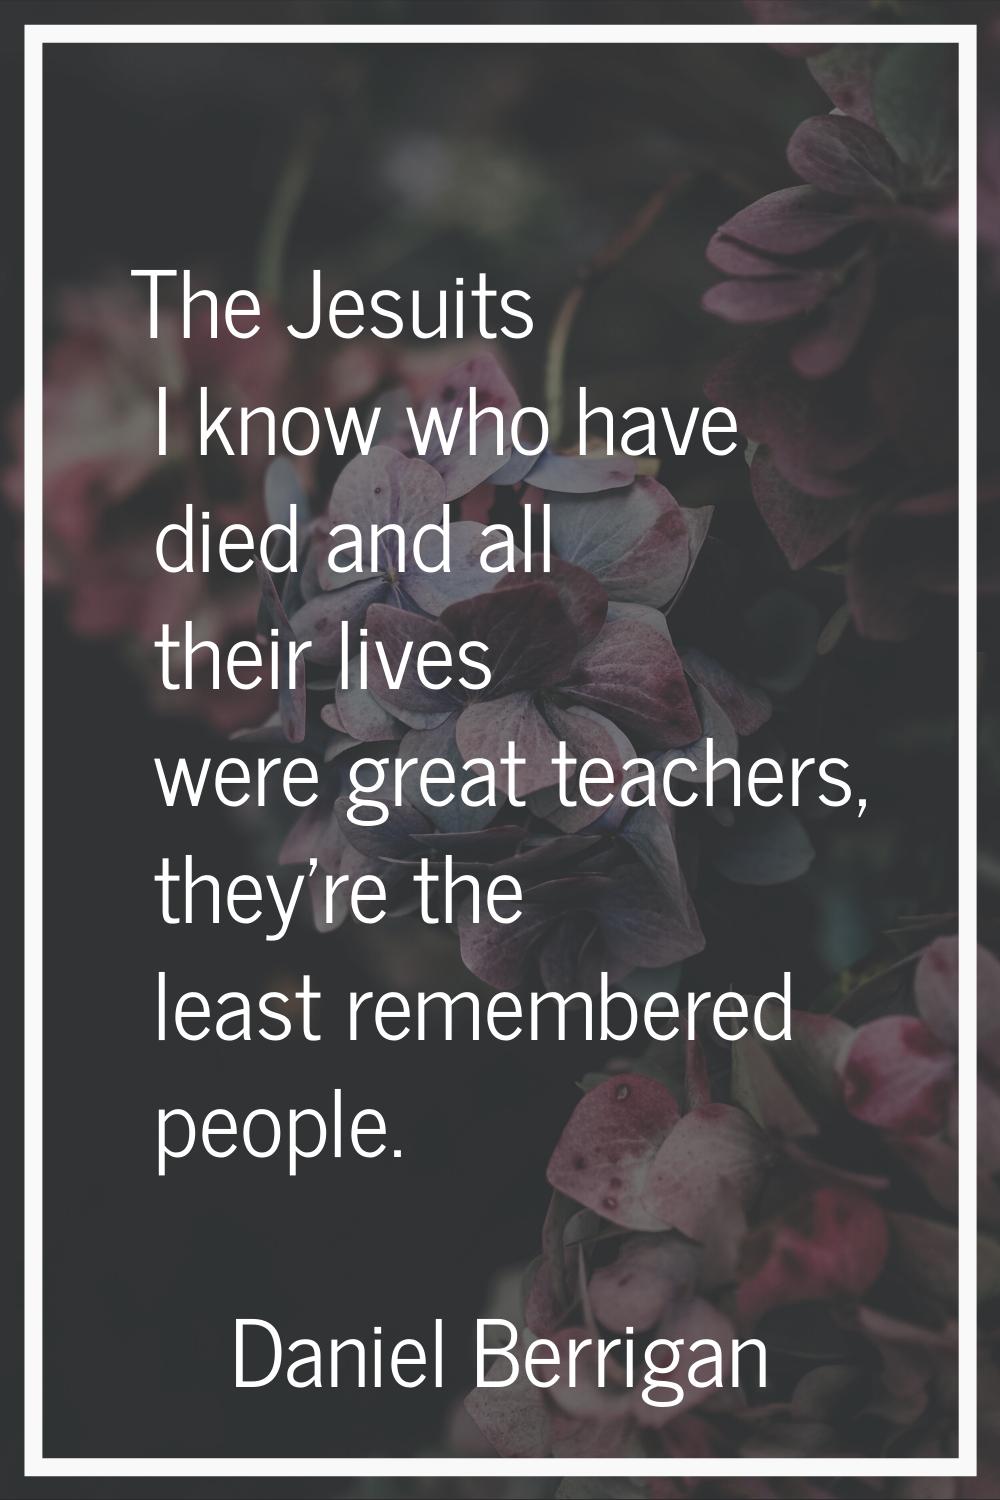 The Jesuits I know who have died and all their lives were great teachers, they're the least remembe